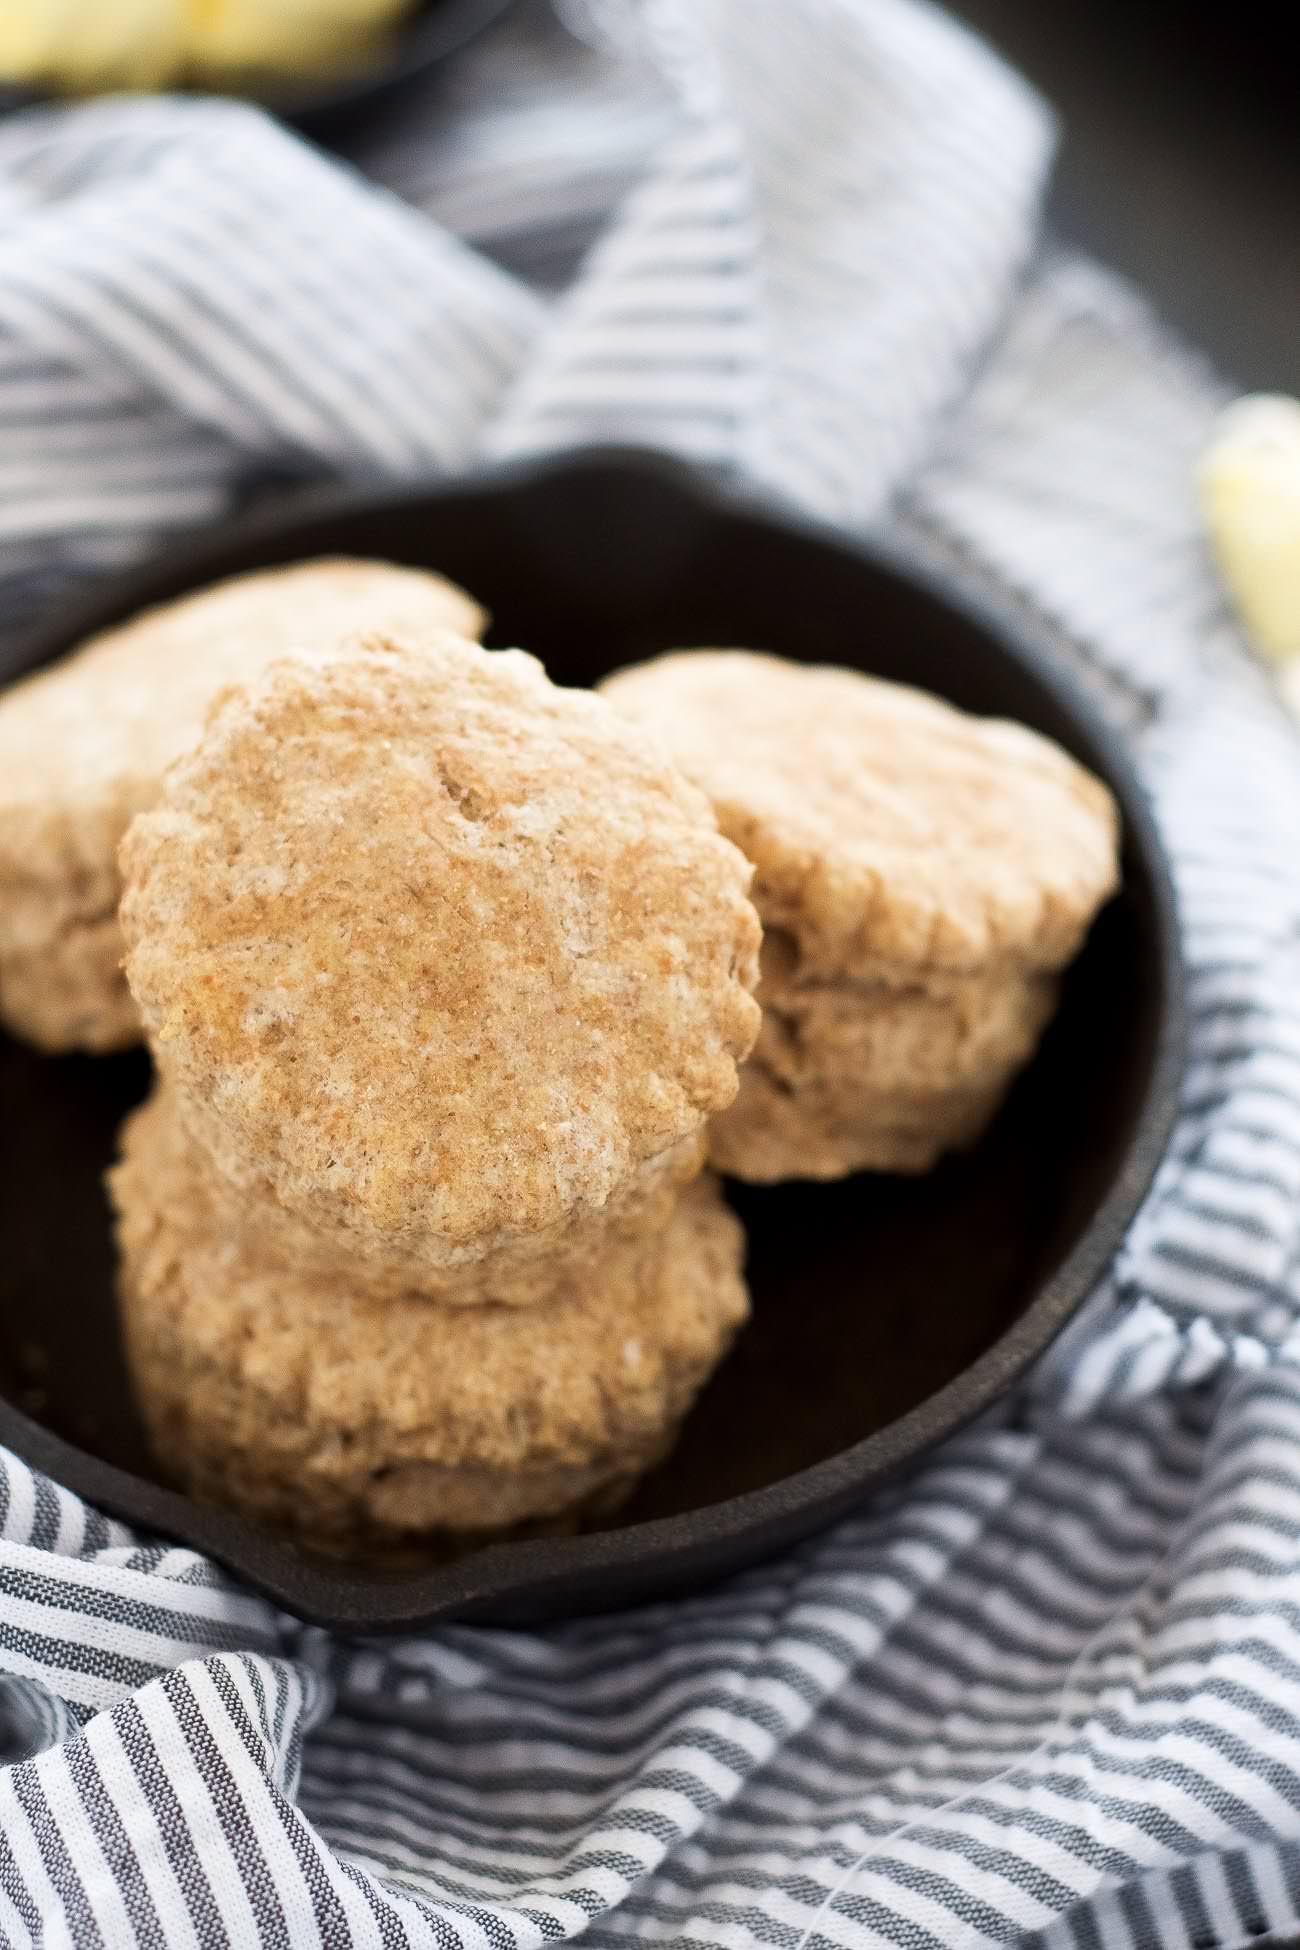 These Flaky Whole Wheat Biscuits are tender and are made with wholesome ingredients, making them guilt free. Plus they require one bowl and take only 2o minutes! These biscuits will be a family favorite for sure!